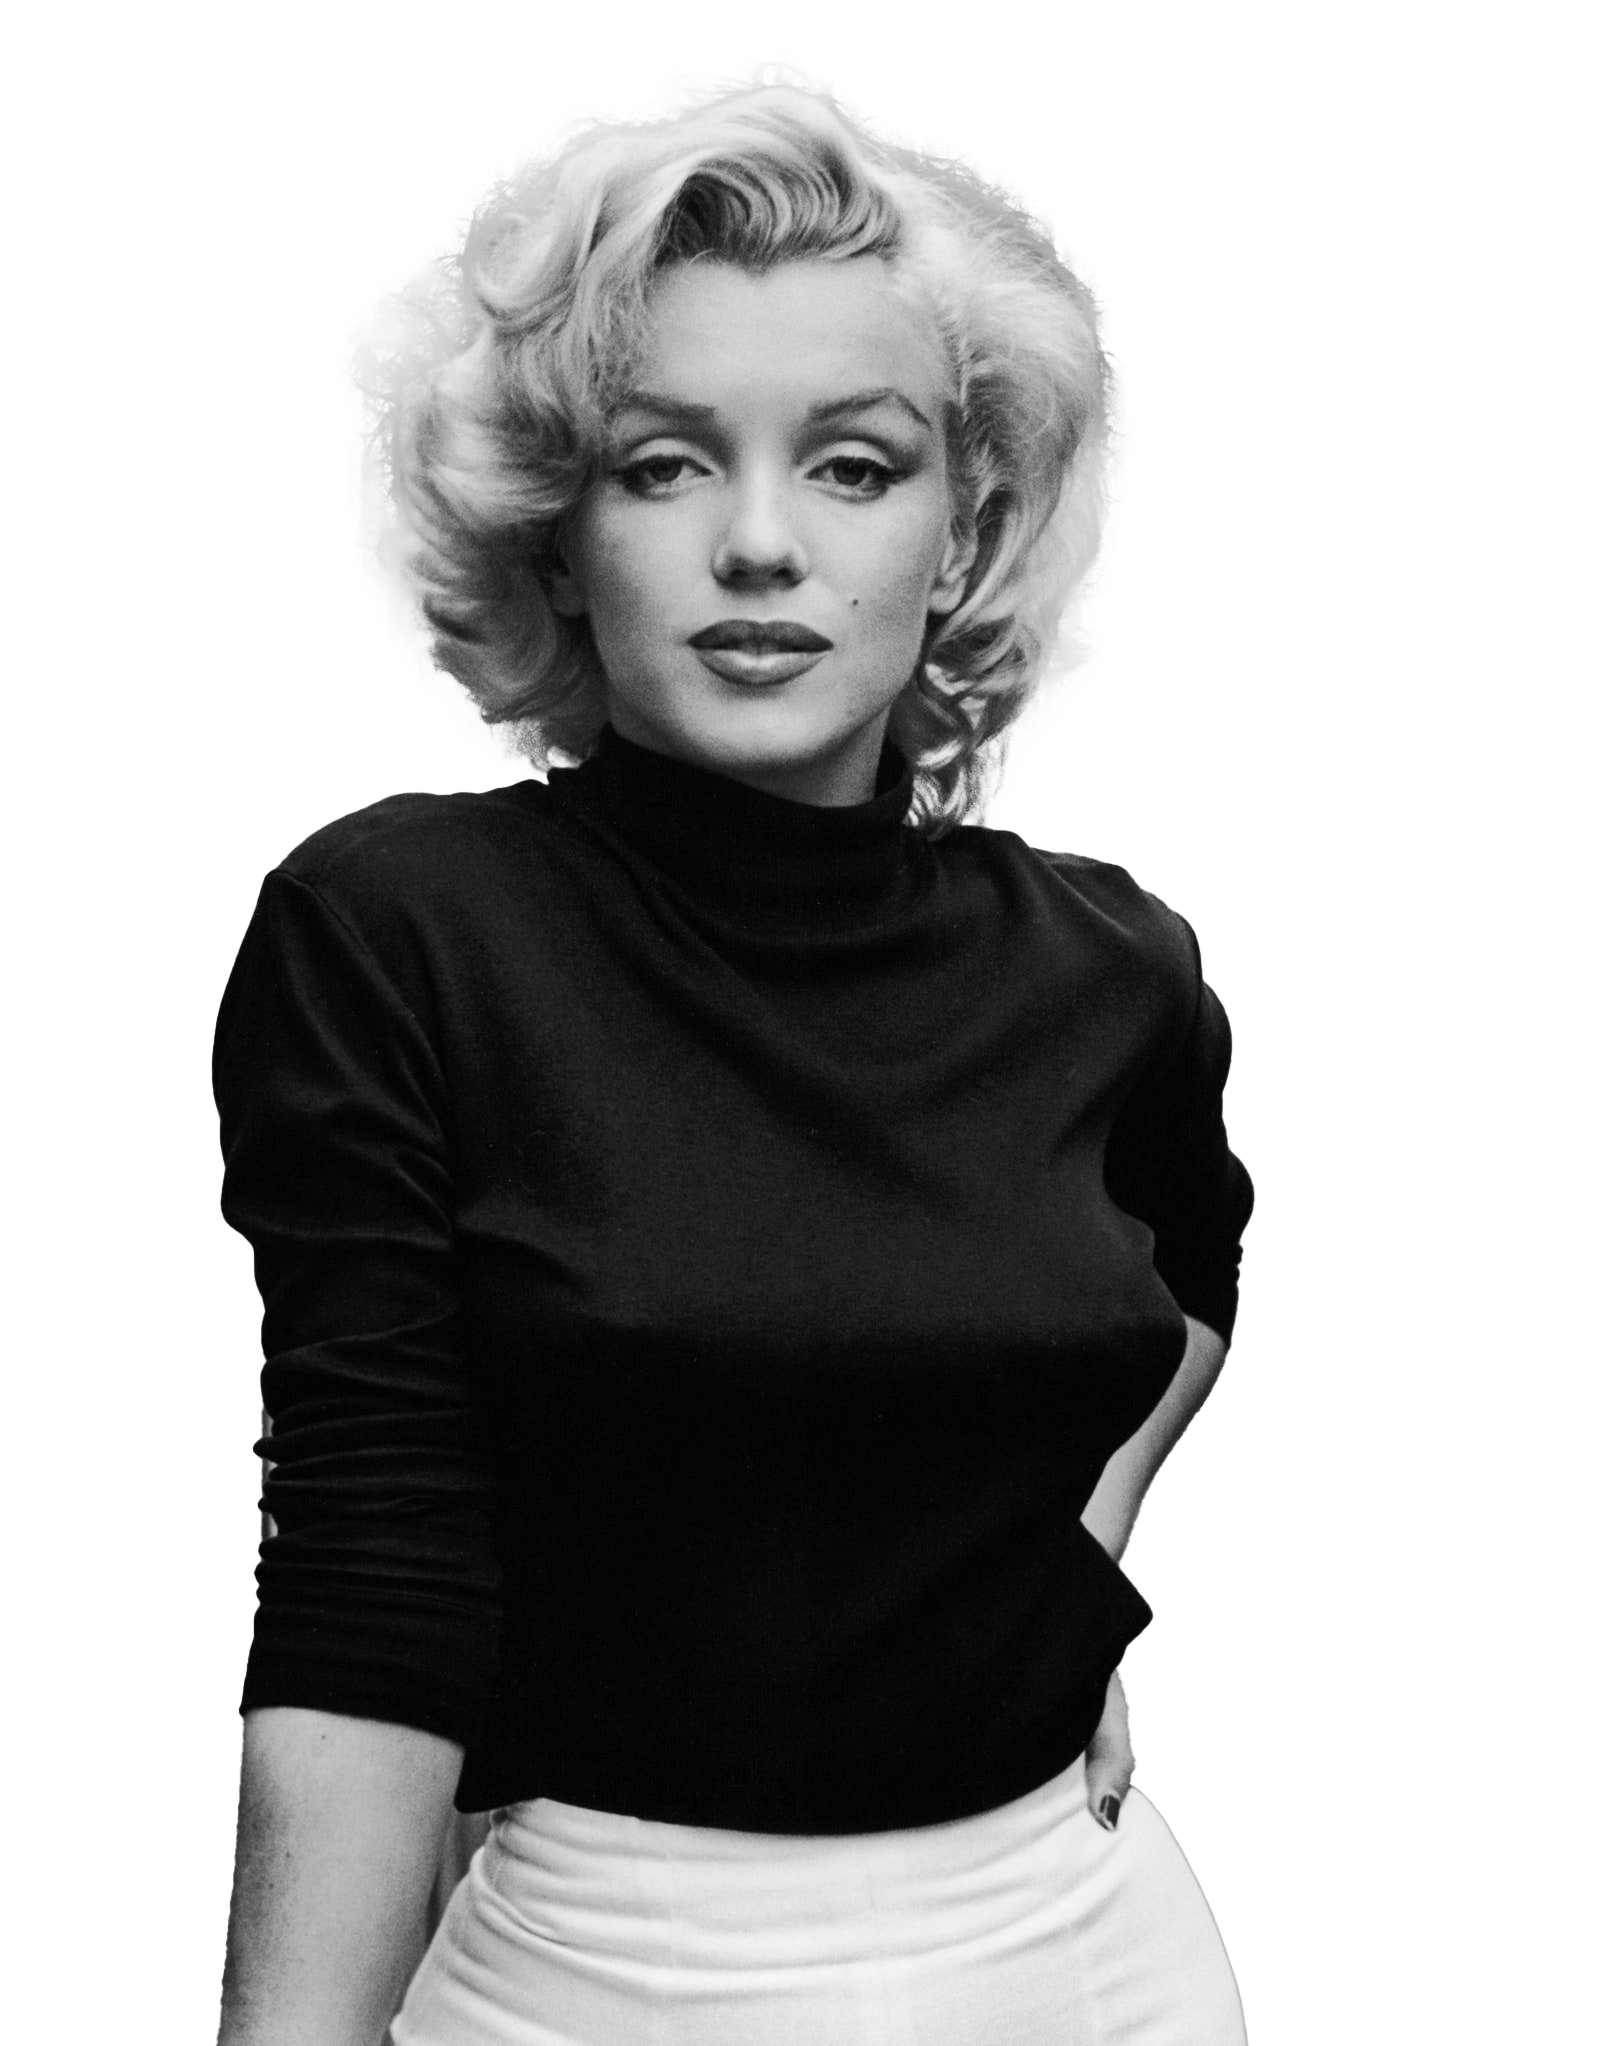 Marilyn Monroe PNG High Quality Image